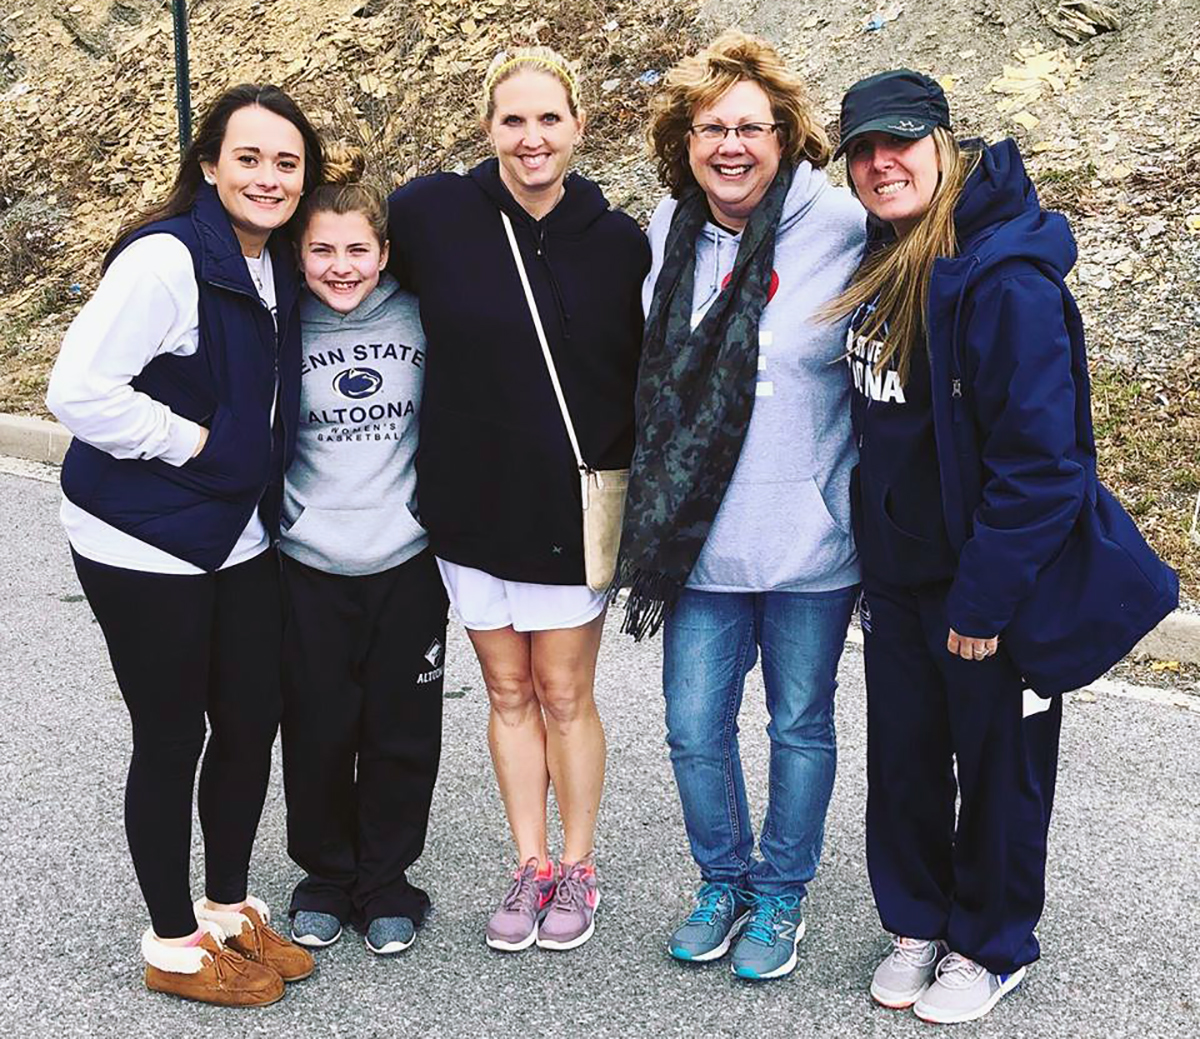 Women's Basketball Honors Former Player With Community Service